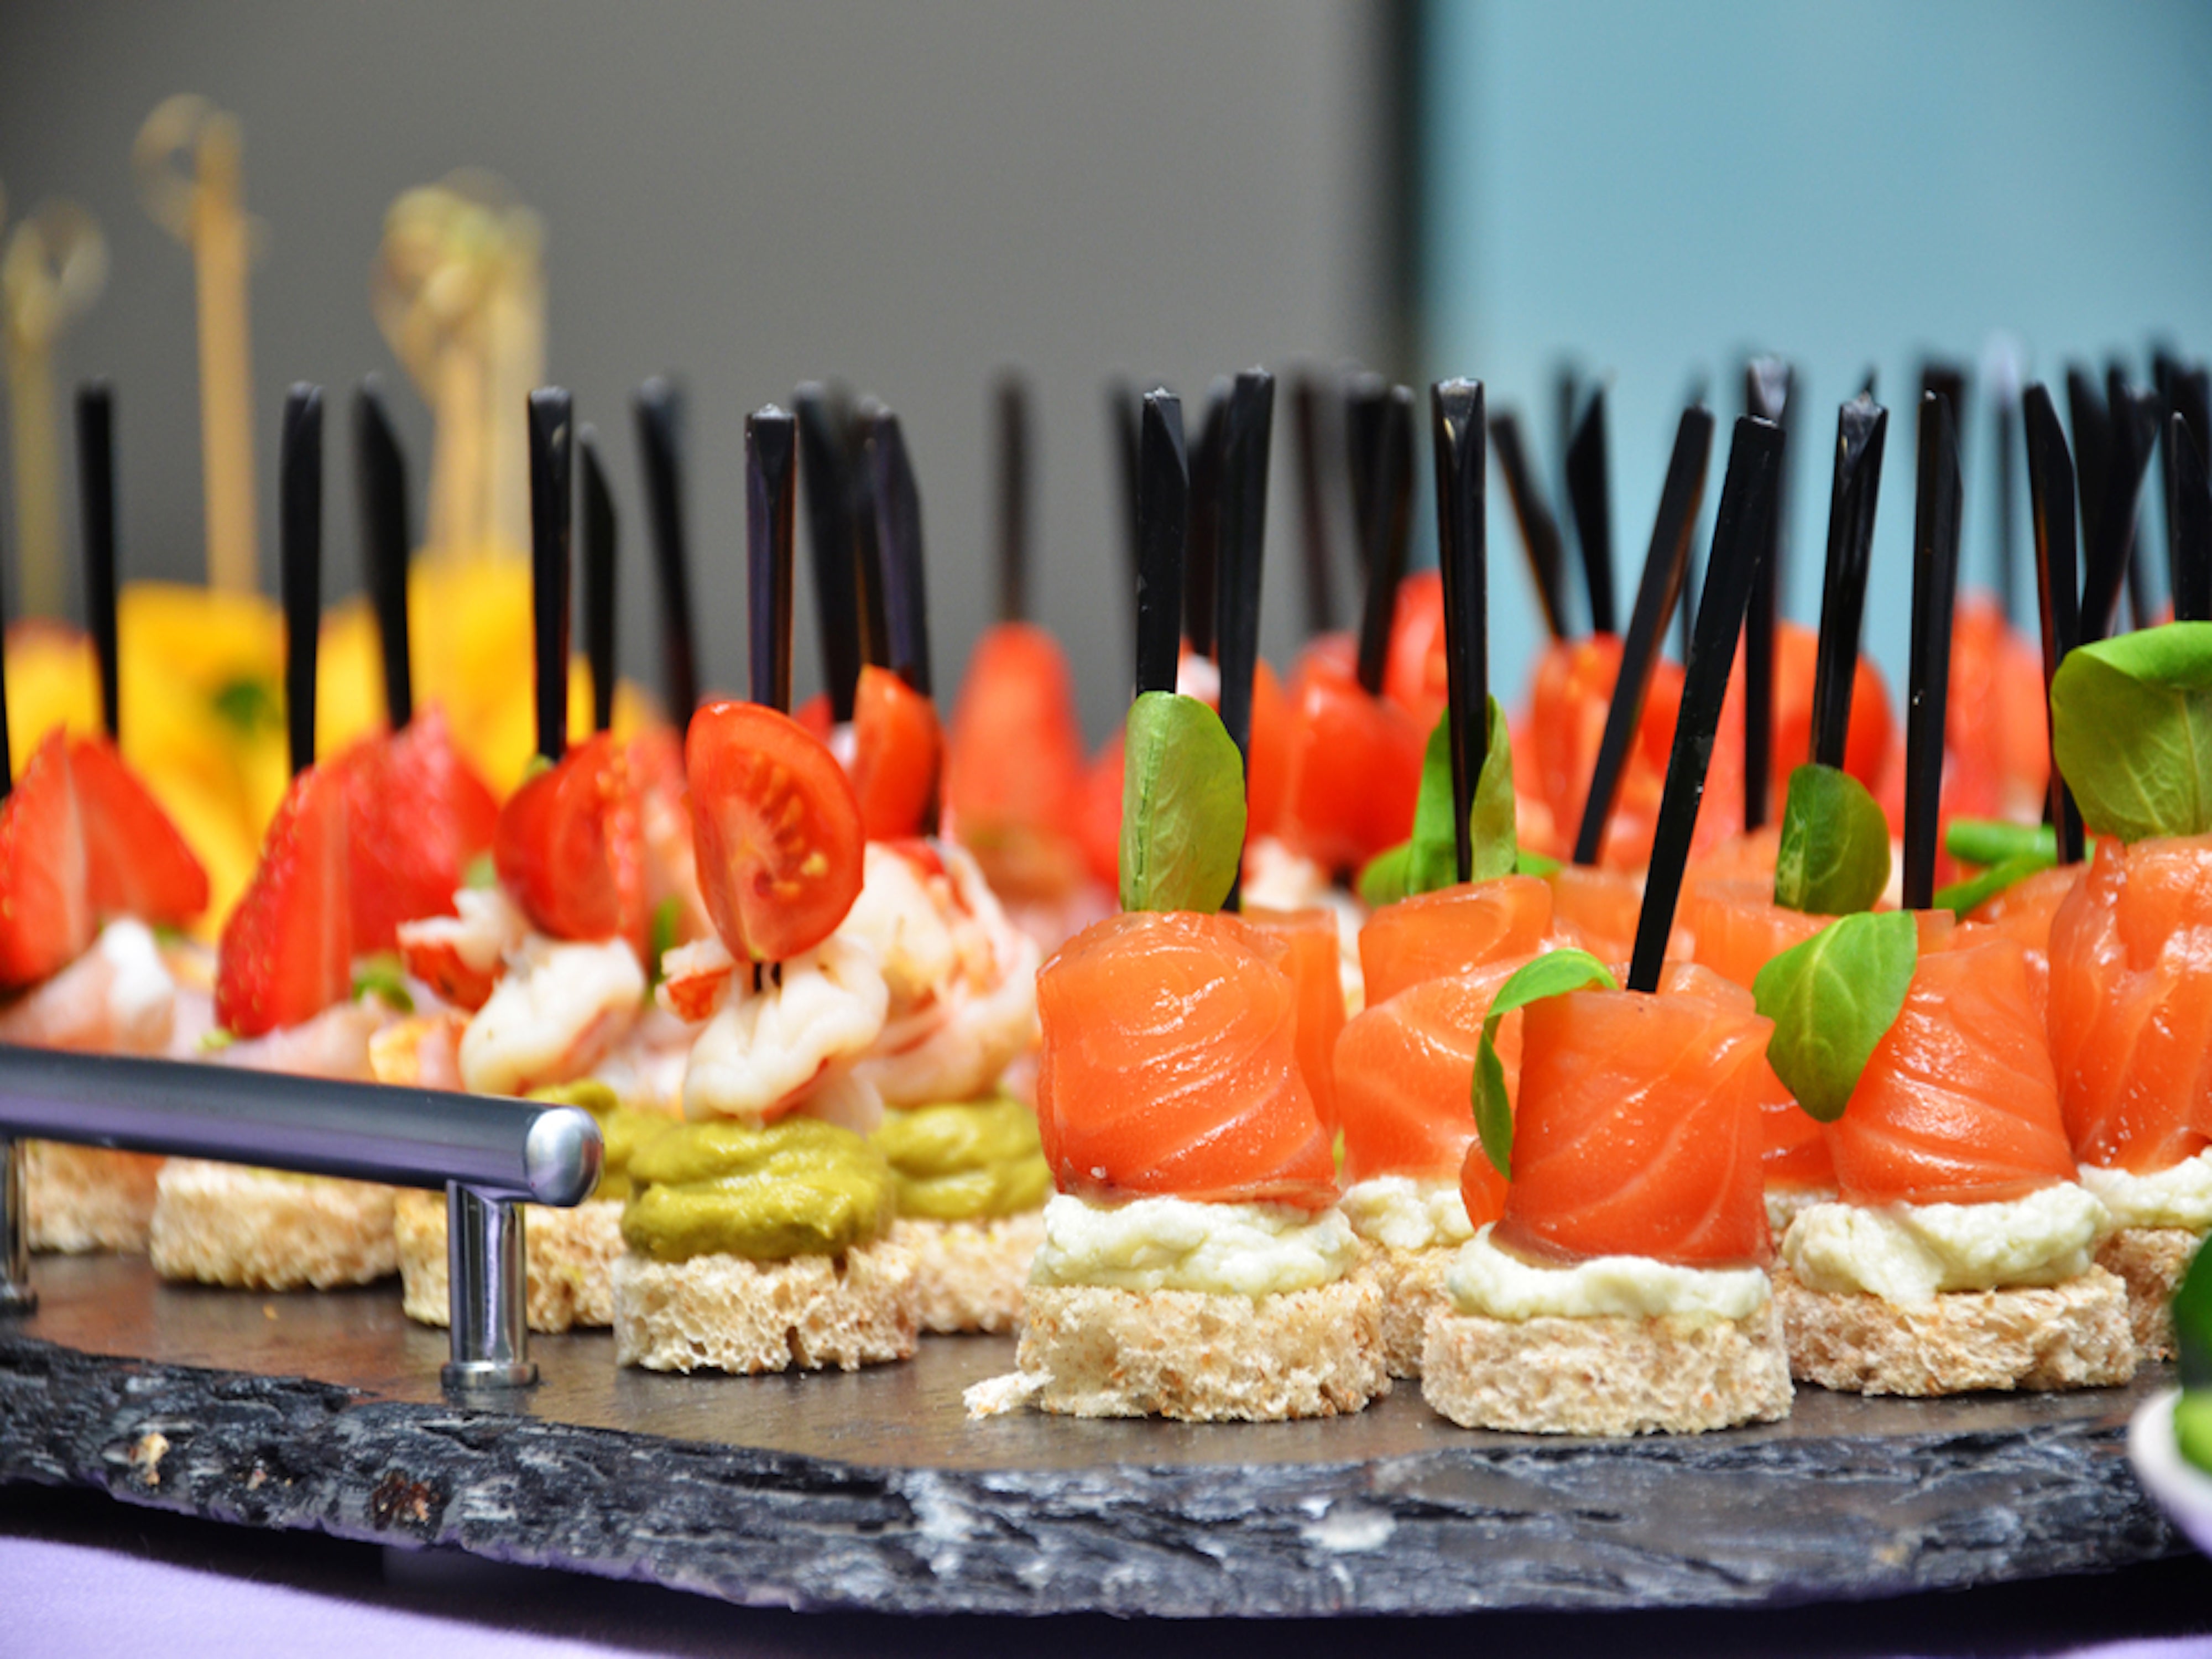 Appetizers and Hors d'oeuvres